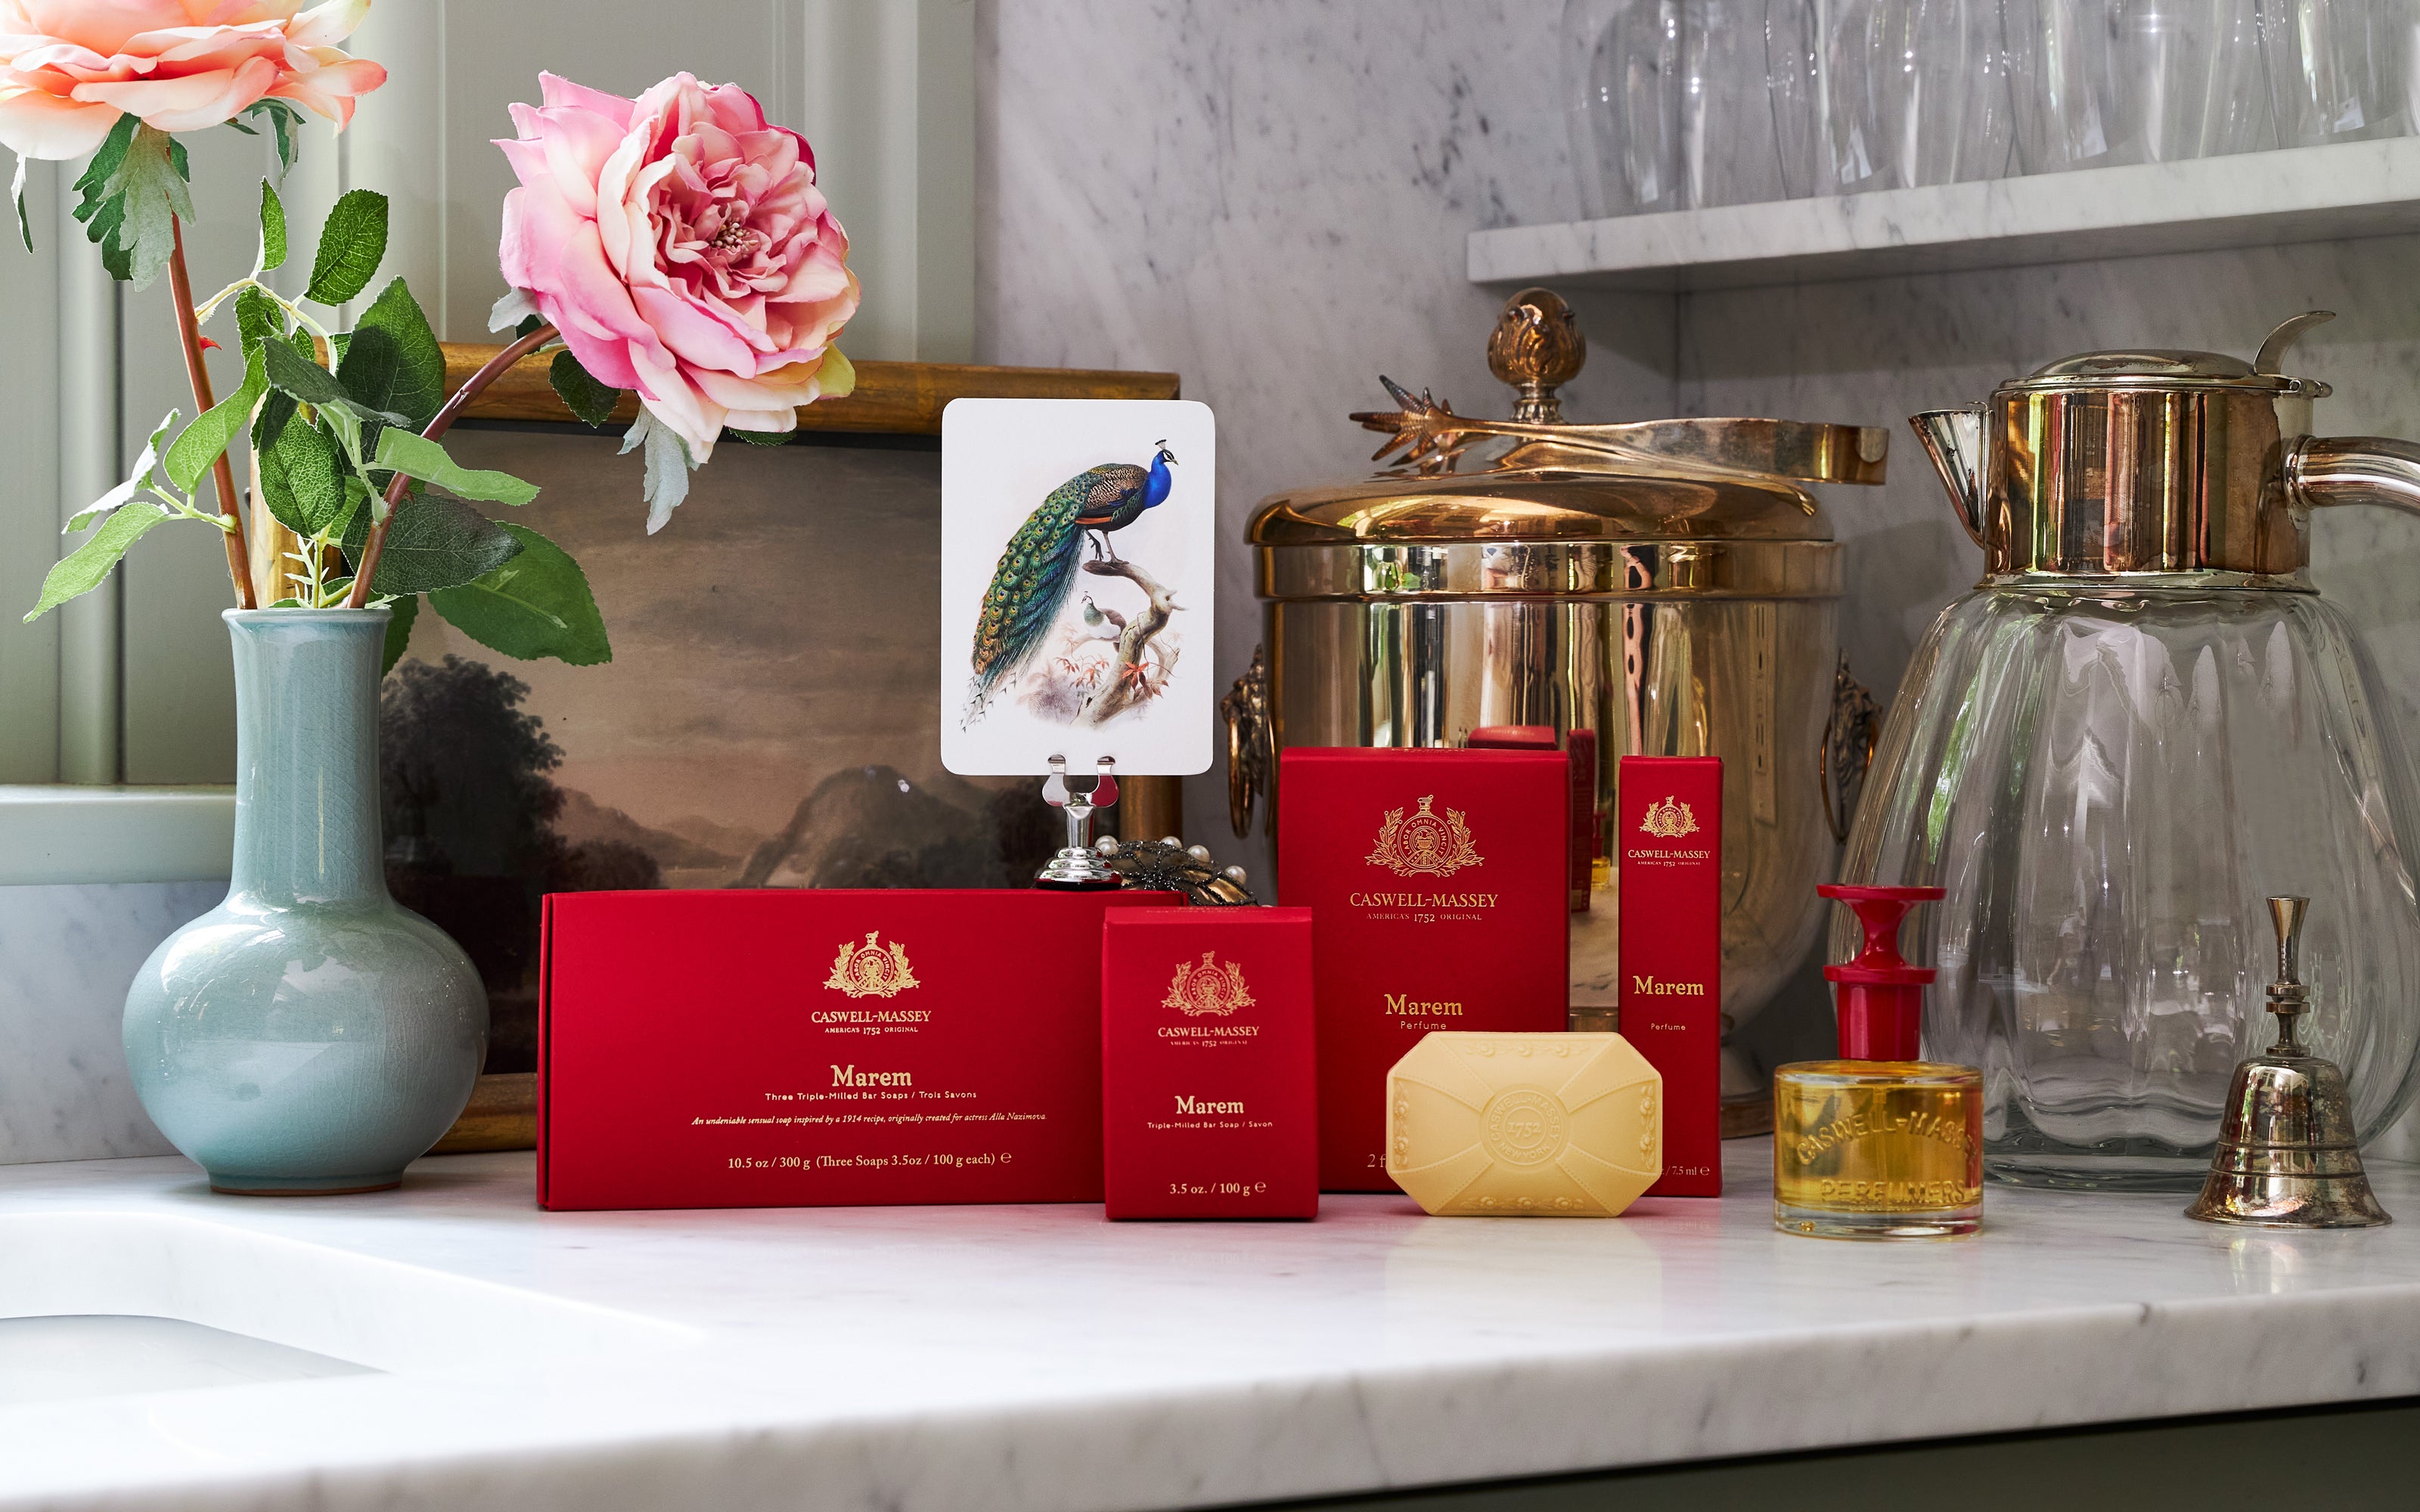 Caswell-Massey Marem Perfume, Marem 3-Soap Gift Set shown in red packaging